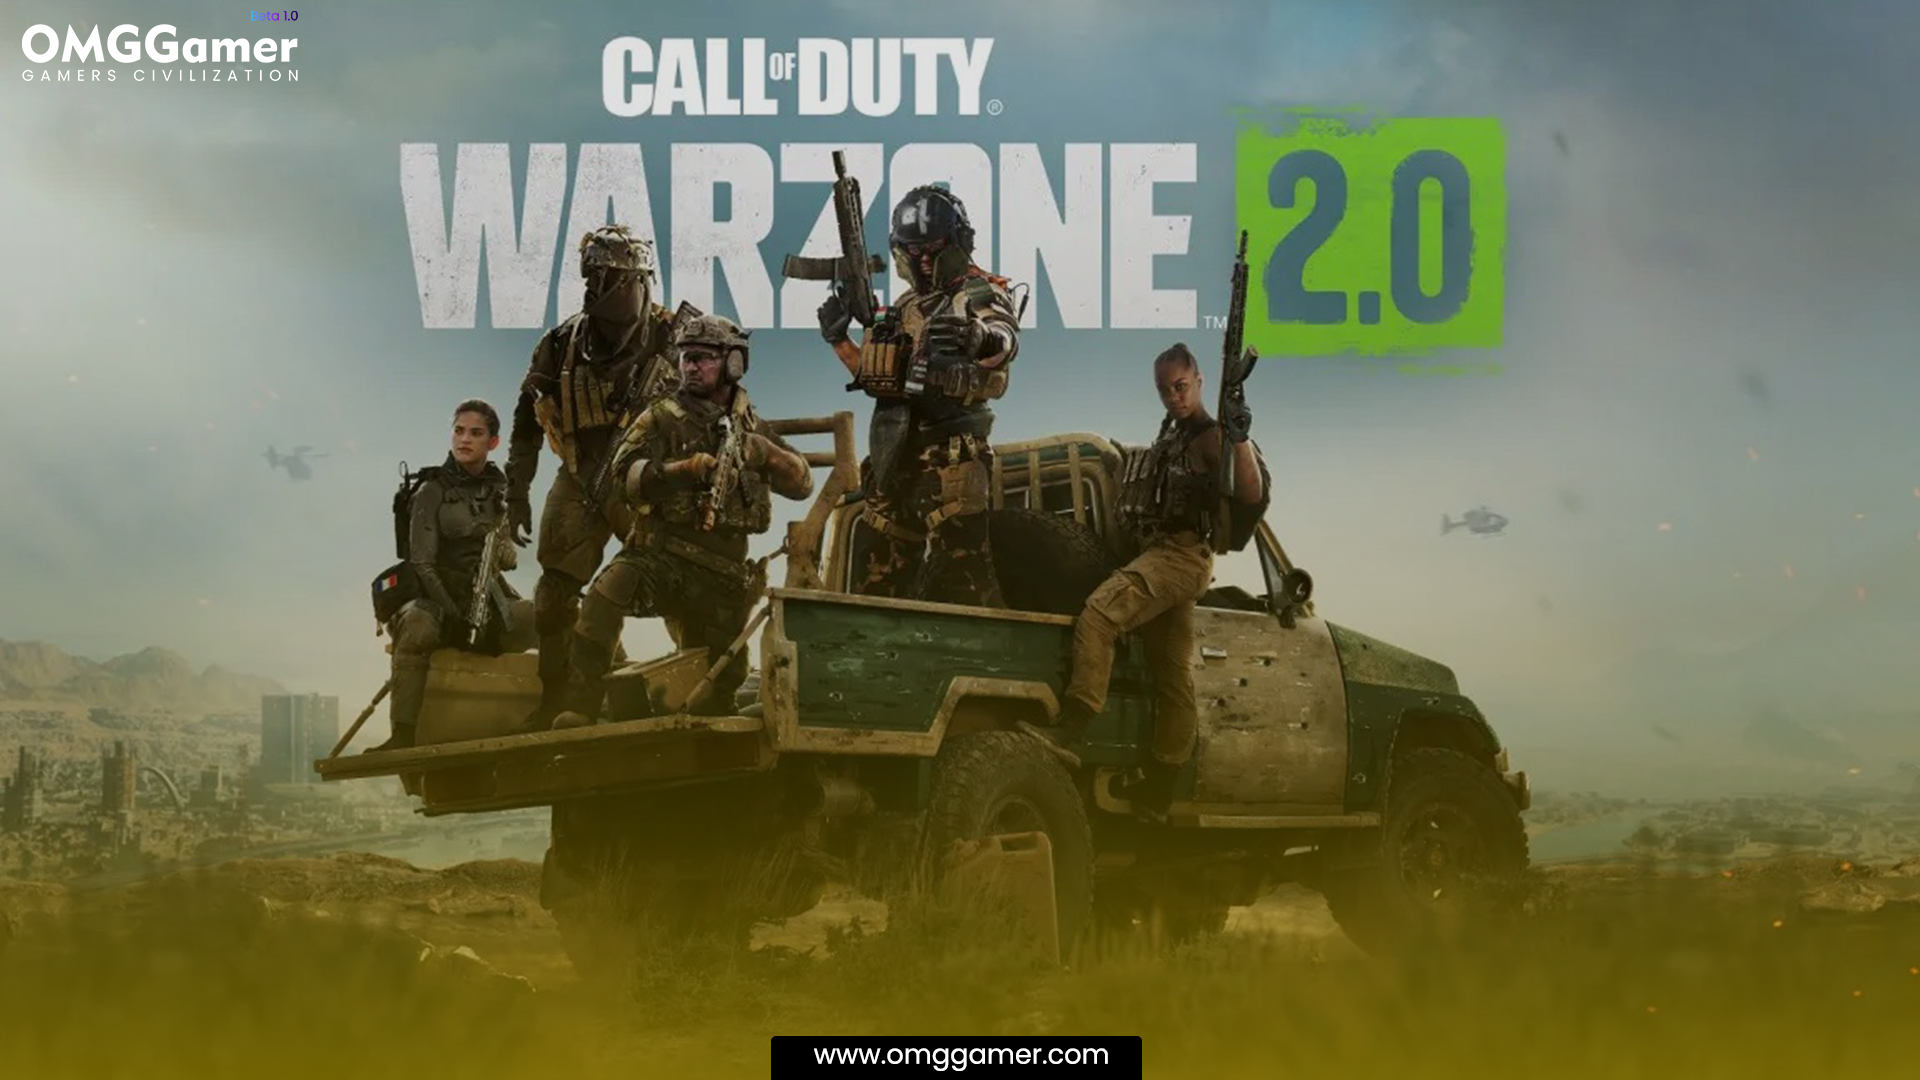 Is Warzone 2 Cross platform between PC and VR